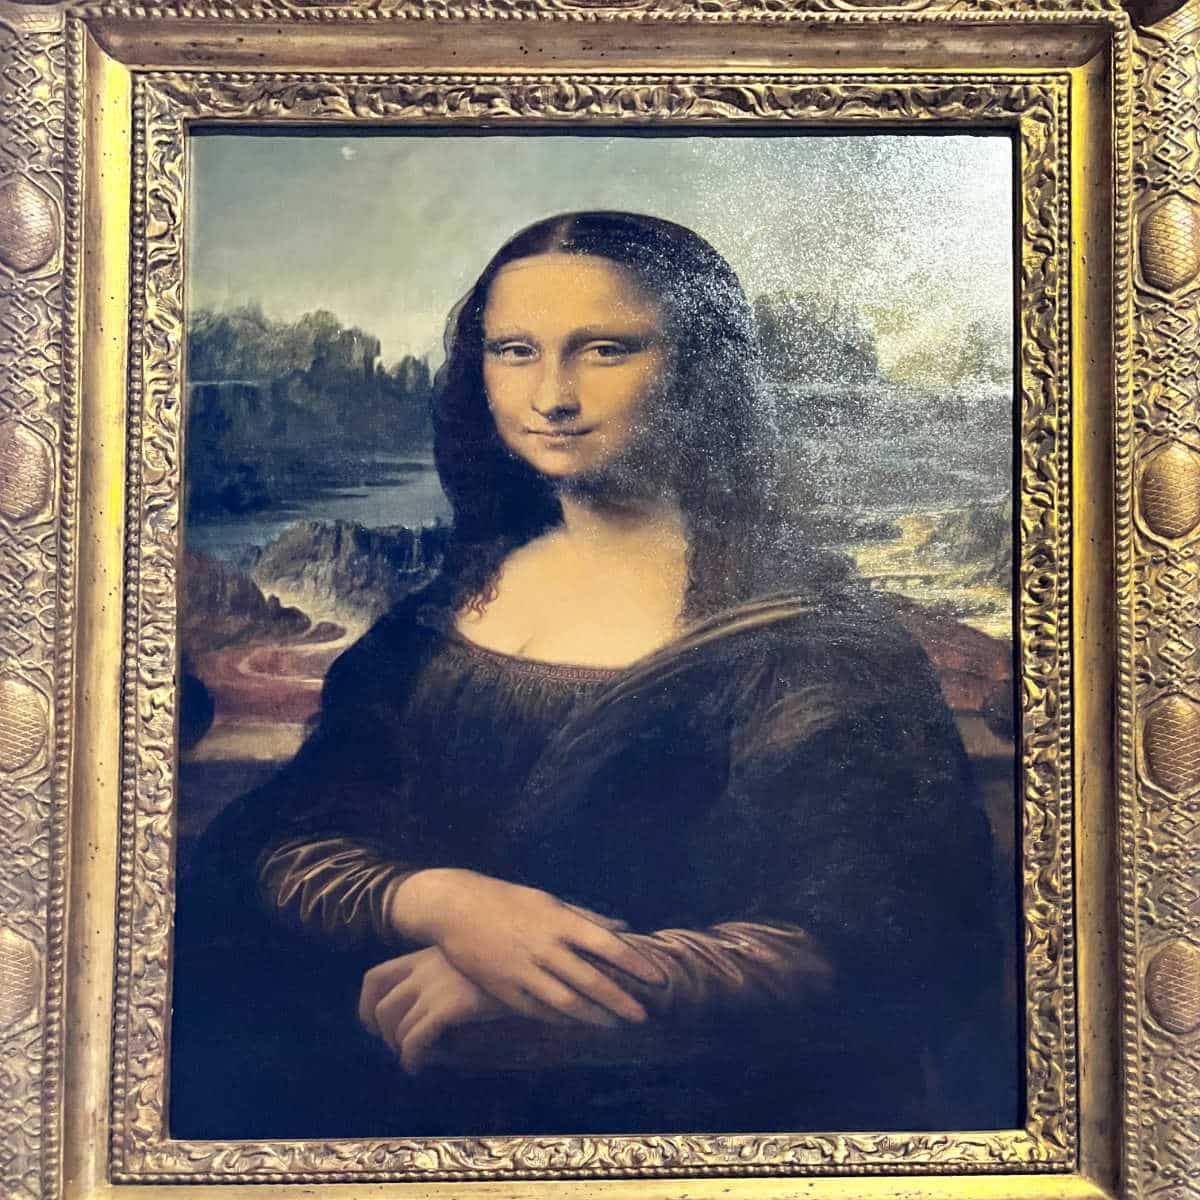 You are currently viewing Mona Lisa by Leonardo da Vinci: 12 facts and history